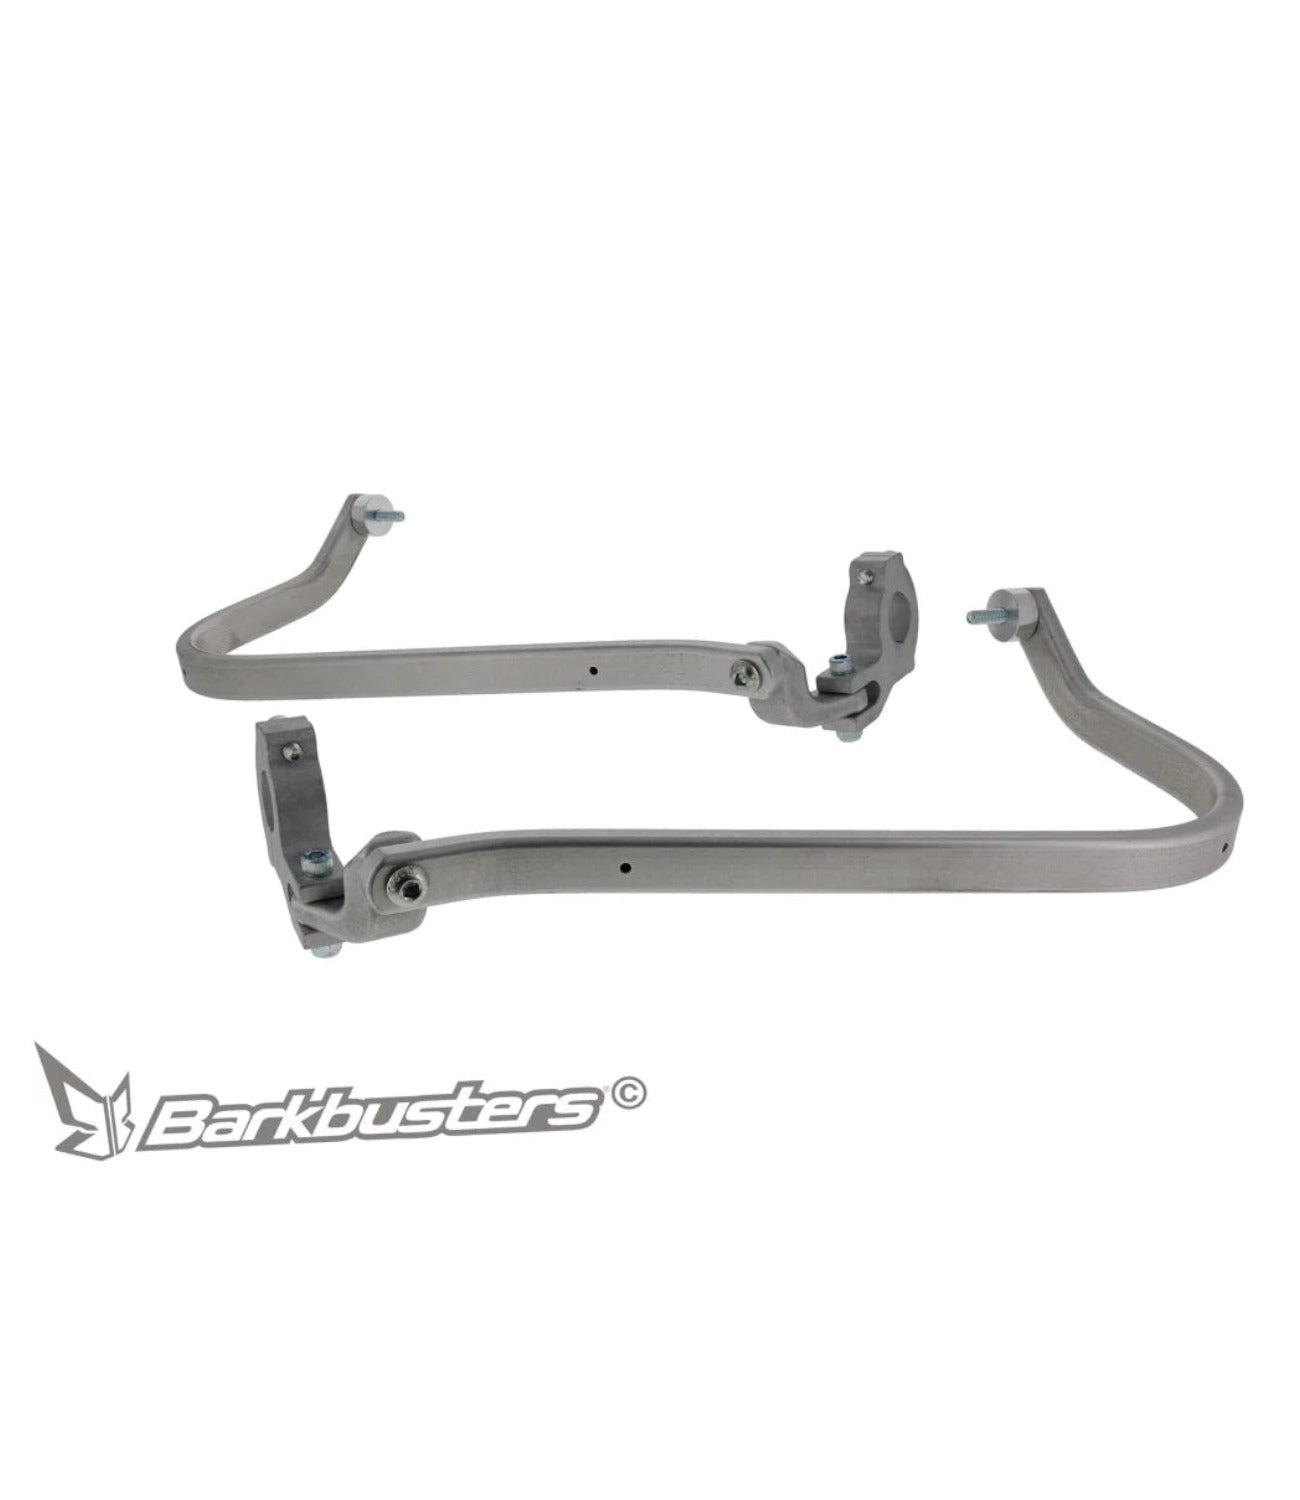 Barkbusters - Two Point Handguard Hardware Mount For BMW G 310GS & G 310R